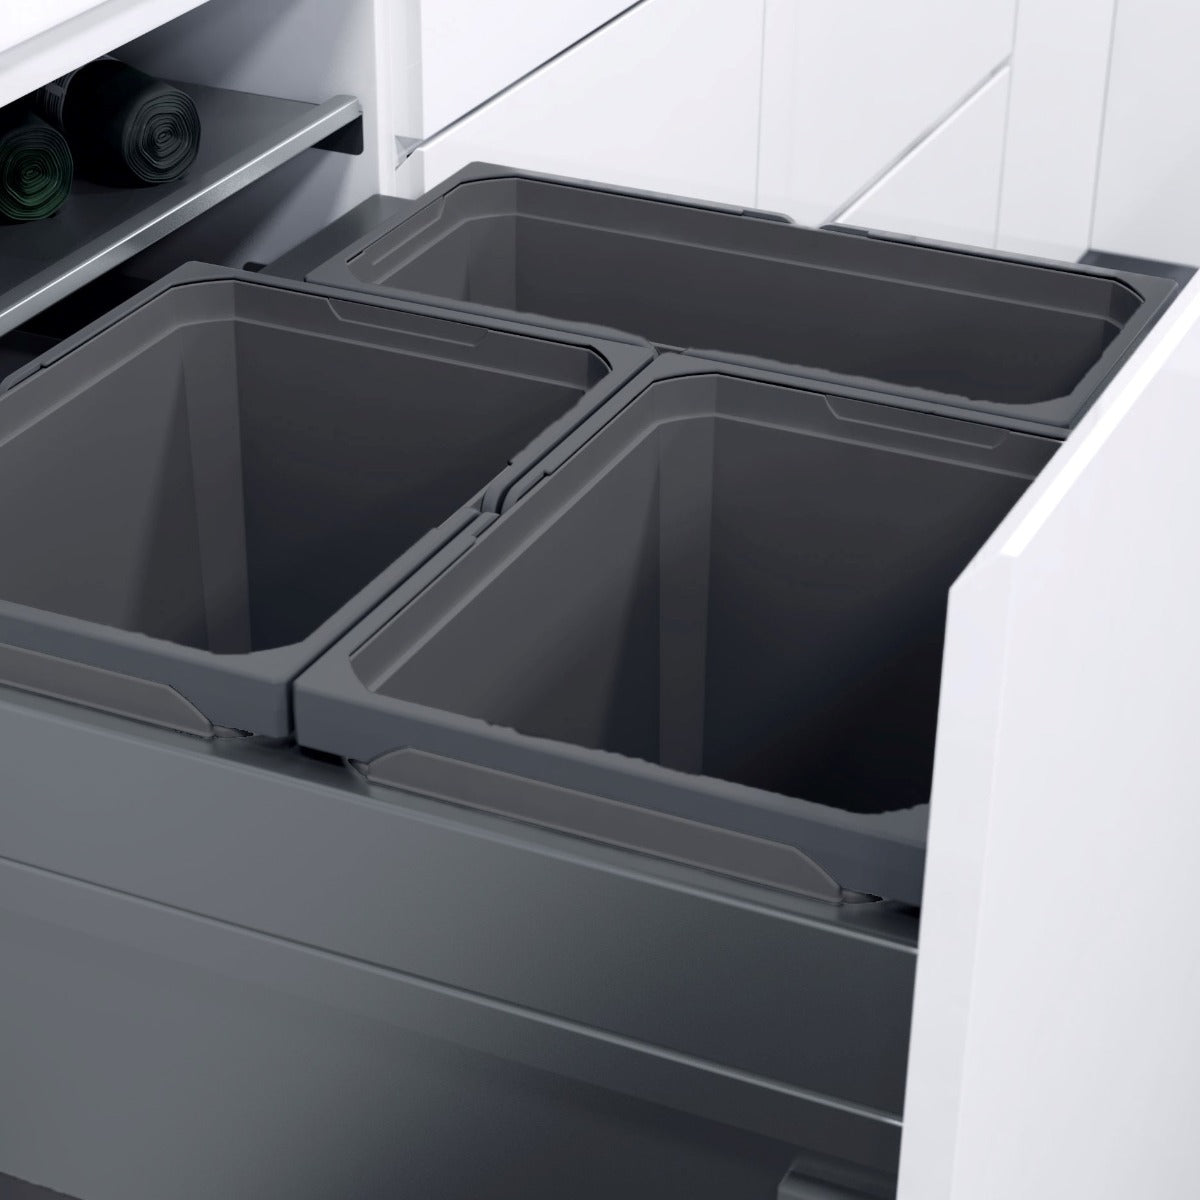 A dark grey Vauth-Sagel integrated kitchen bin with three compartments for separating waste and recycling.